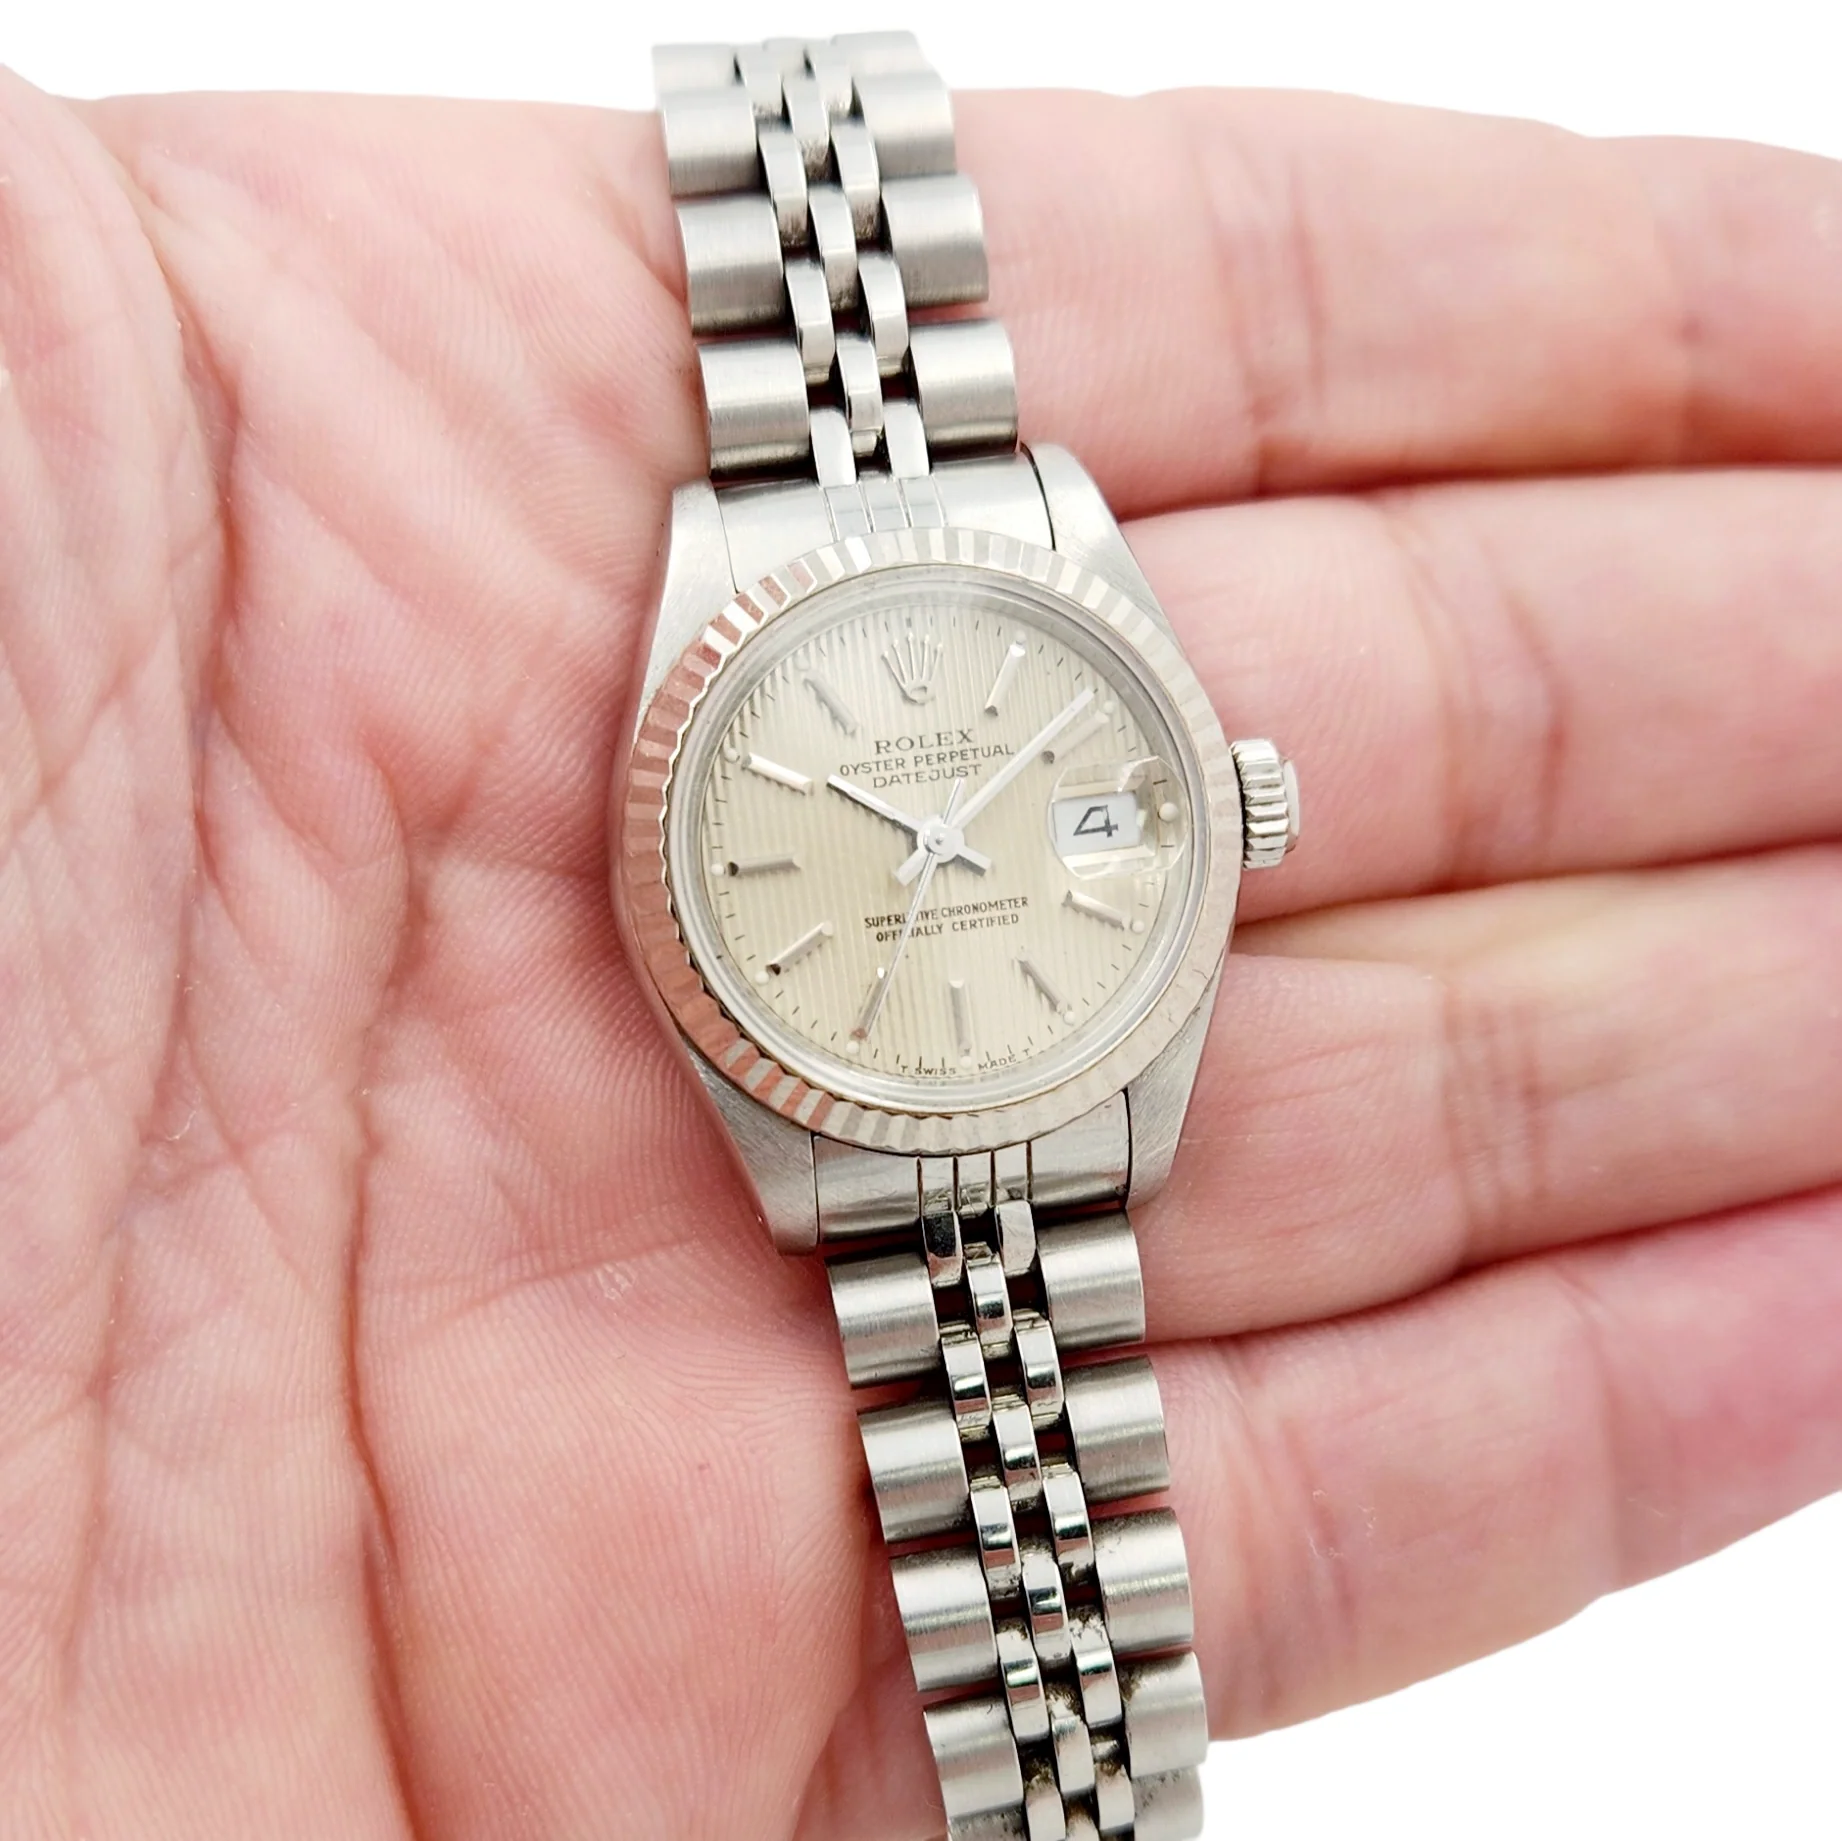 Ladies Rolex 26mm DateJust Stainless Steel Watch with Silver Tapestry Dial and Fluted Bezel. (Pre-Owned 69174)